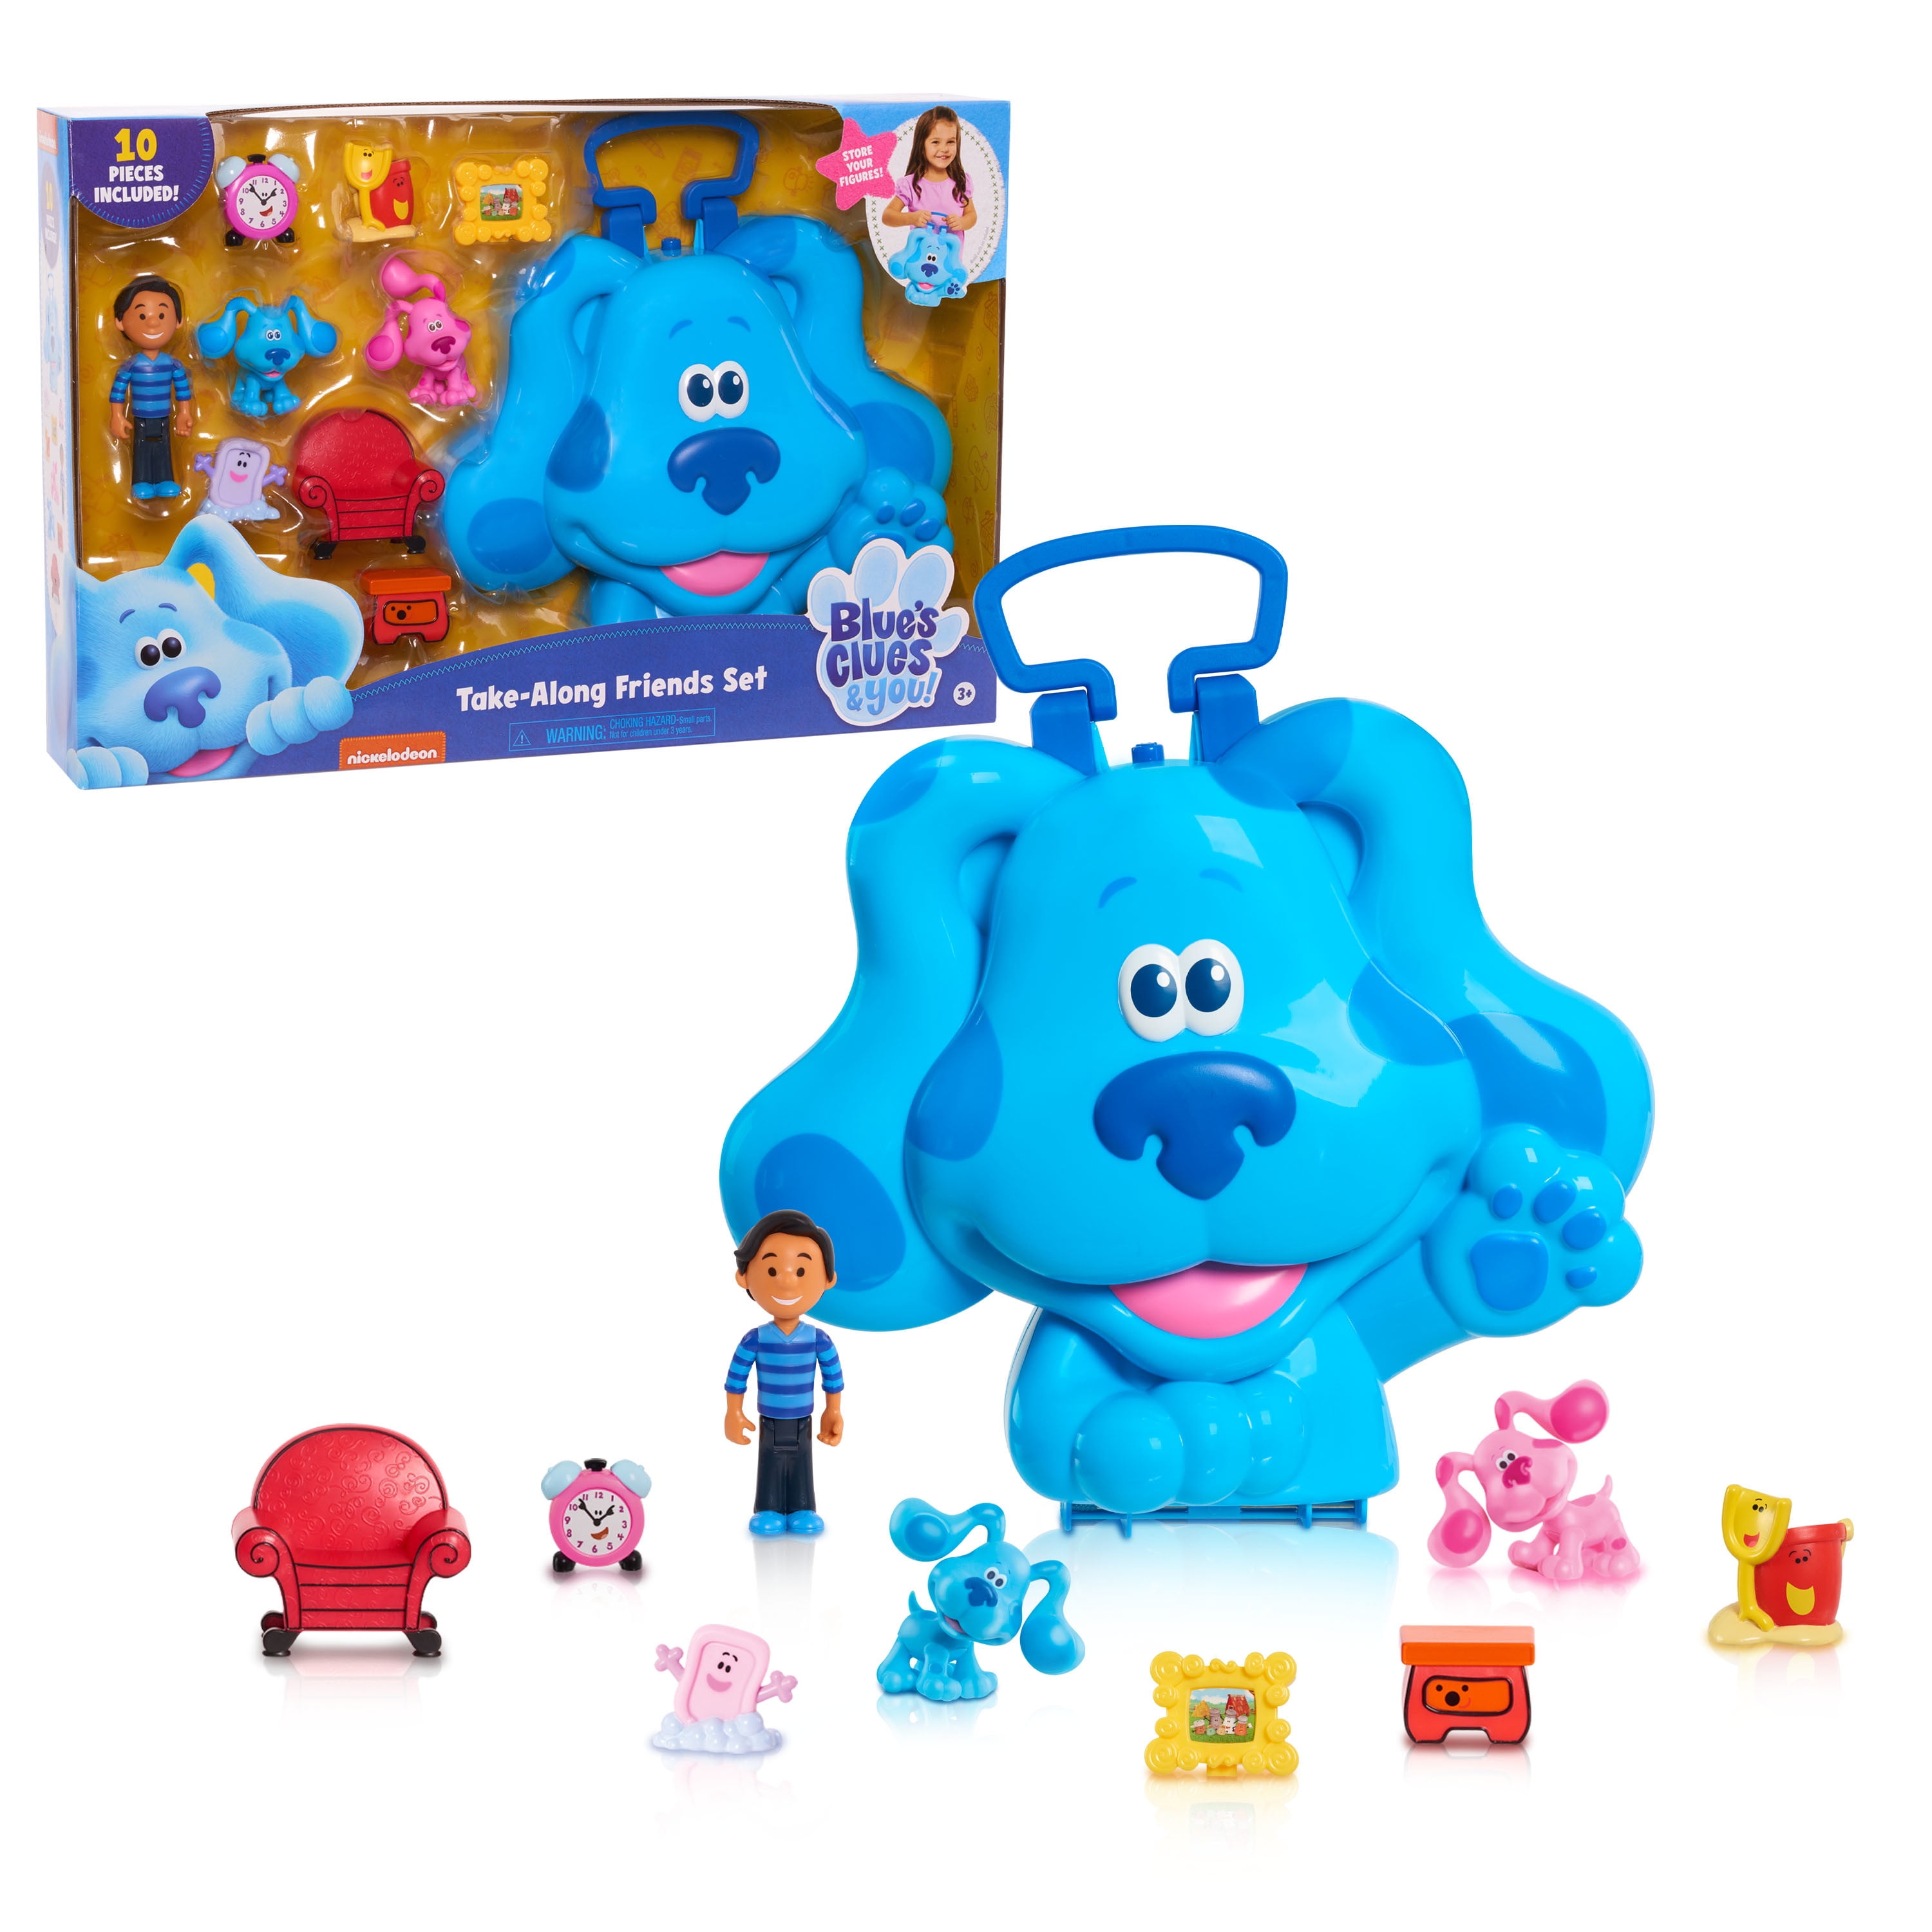 Blue's Clues & You Sing Along Guitar 2020 Viacom Just Play 0970sh01 49635 Toy for sale online 